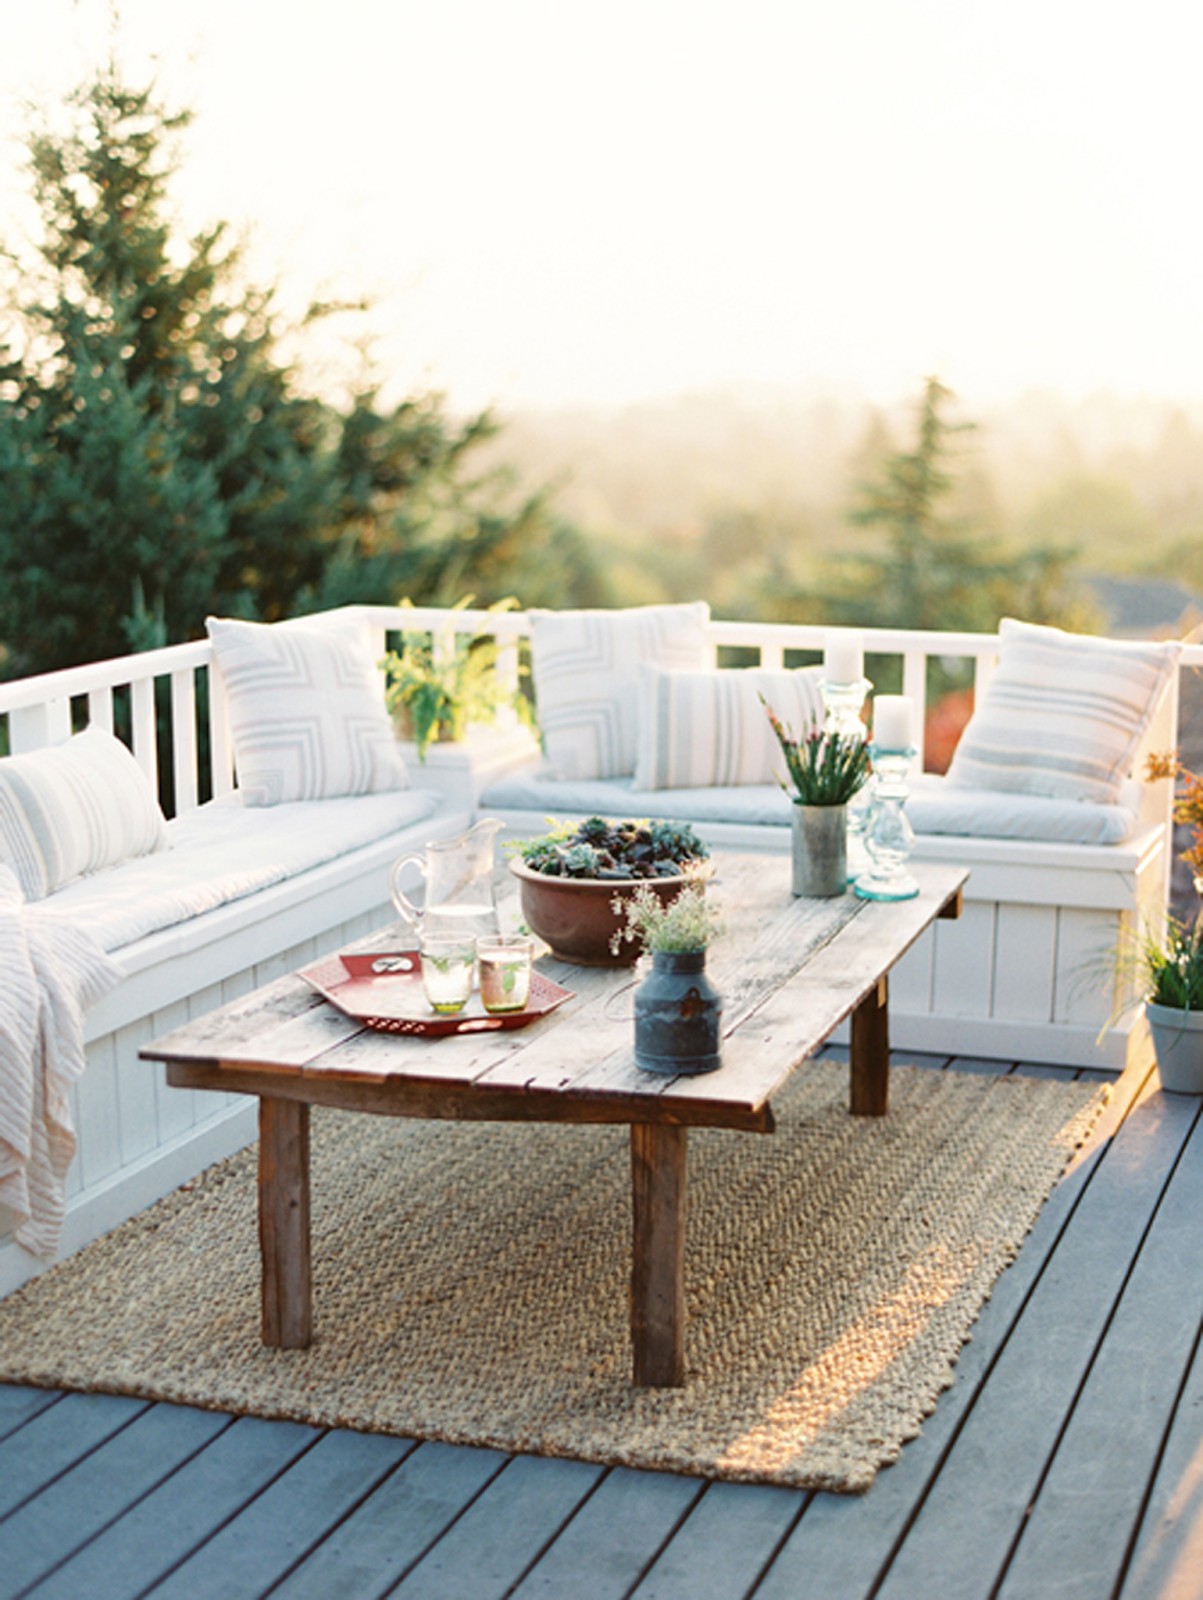 Wood deck benches